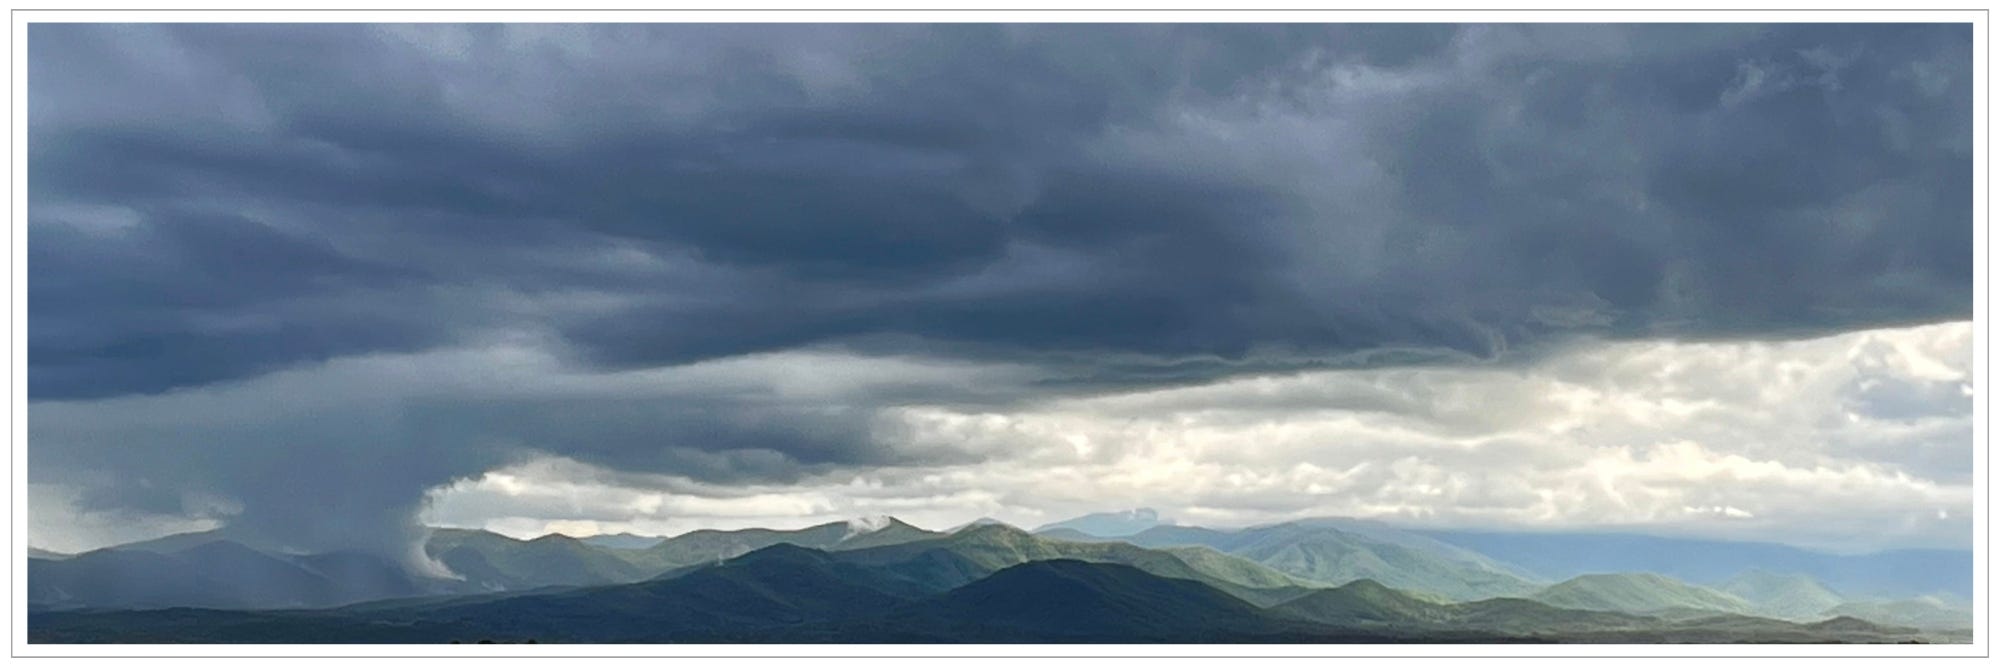 funnel shaped dark cloud hovering over and reaching into mountain ranges and valleys, greening ranges in the distance